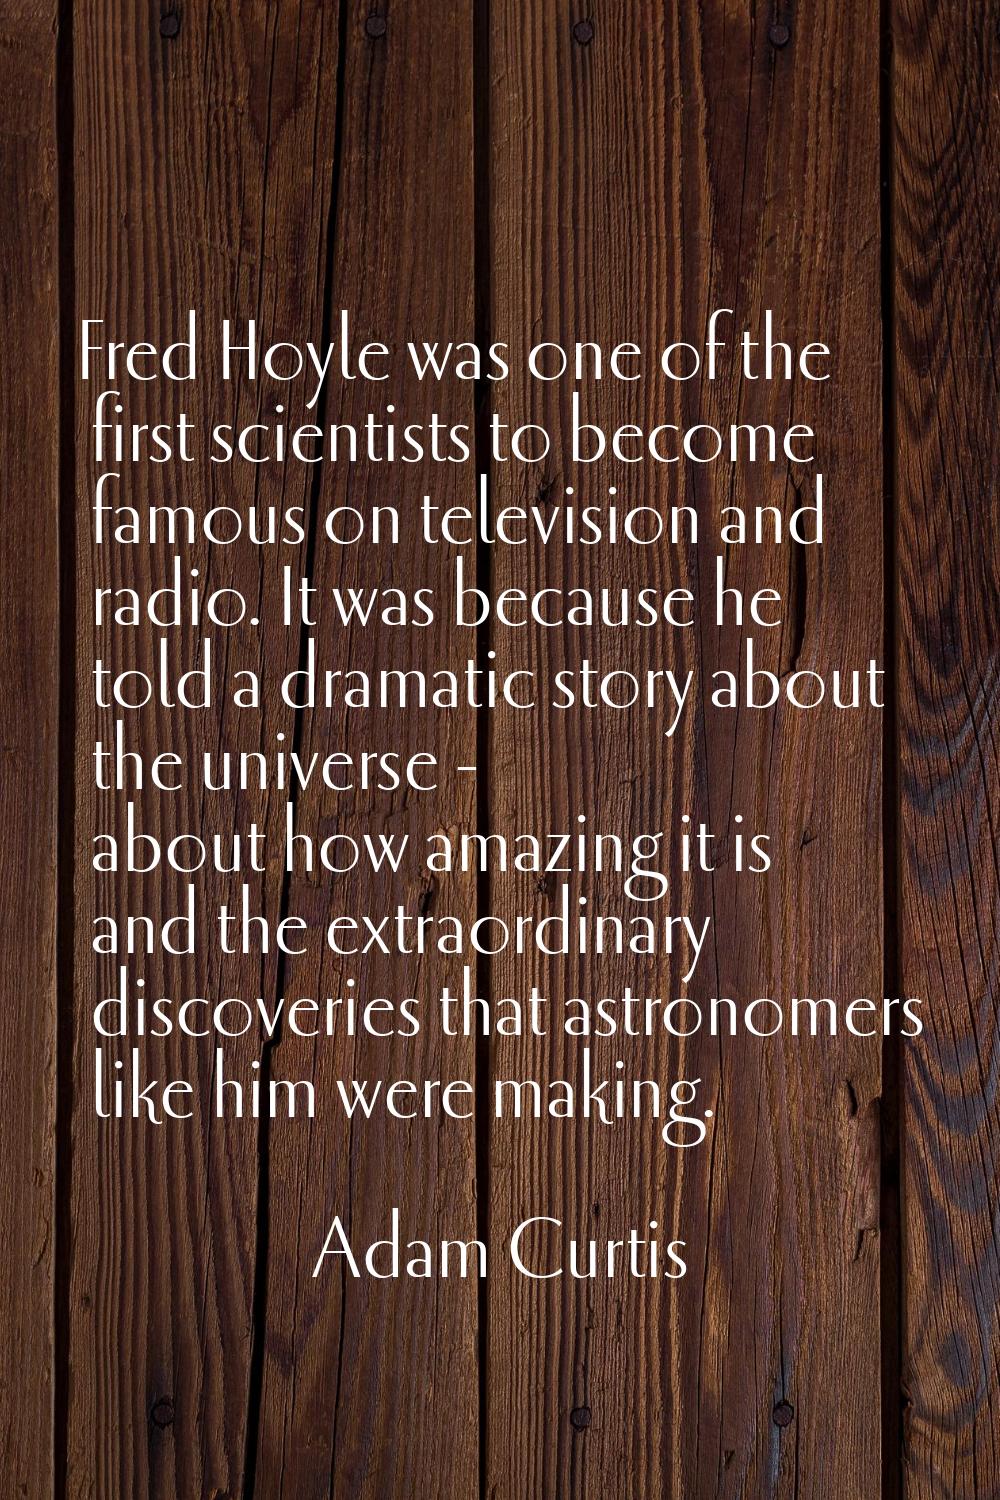 Fred Hoyle was one of the first scientists to become famous on television and radio. It was because